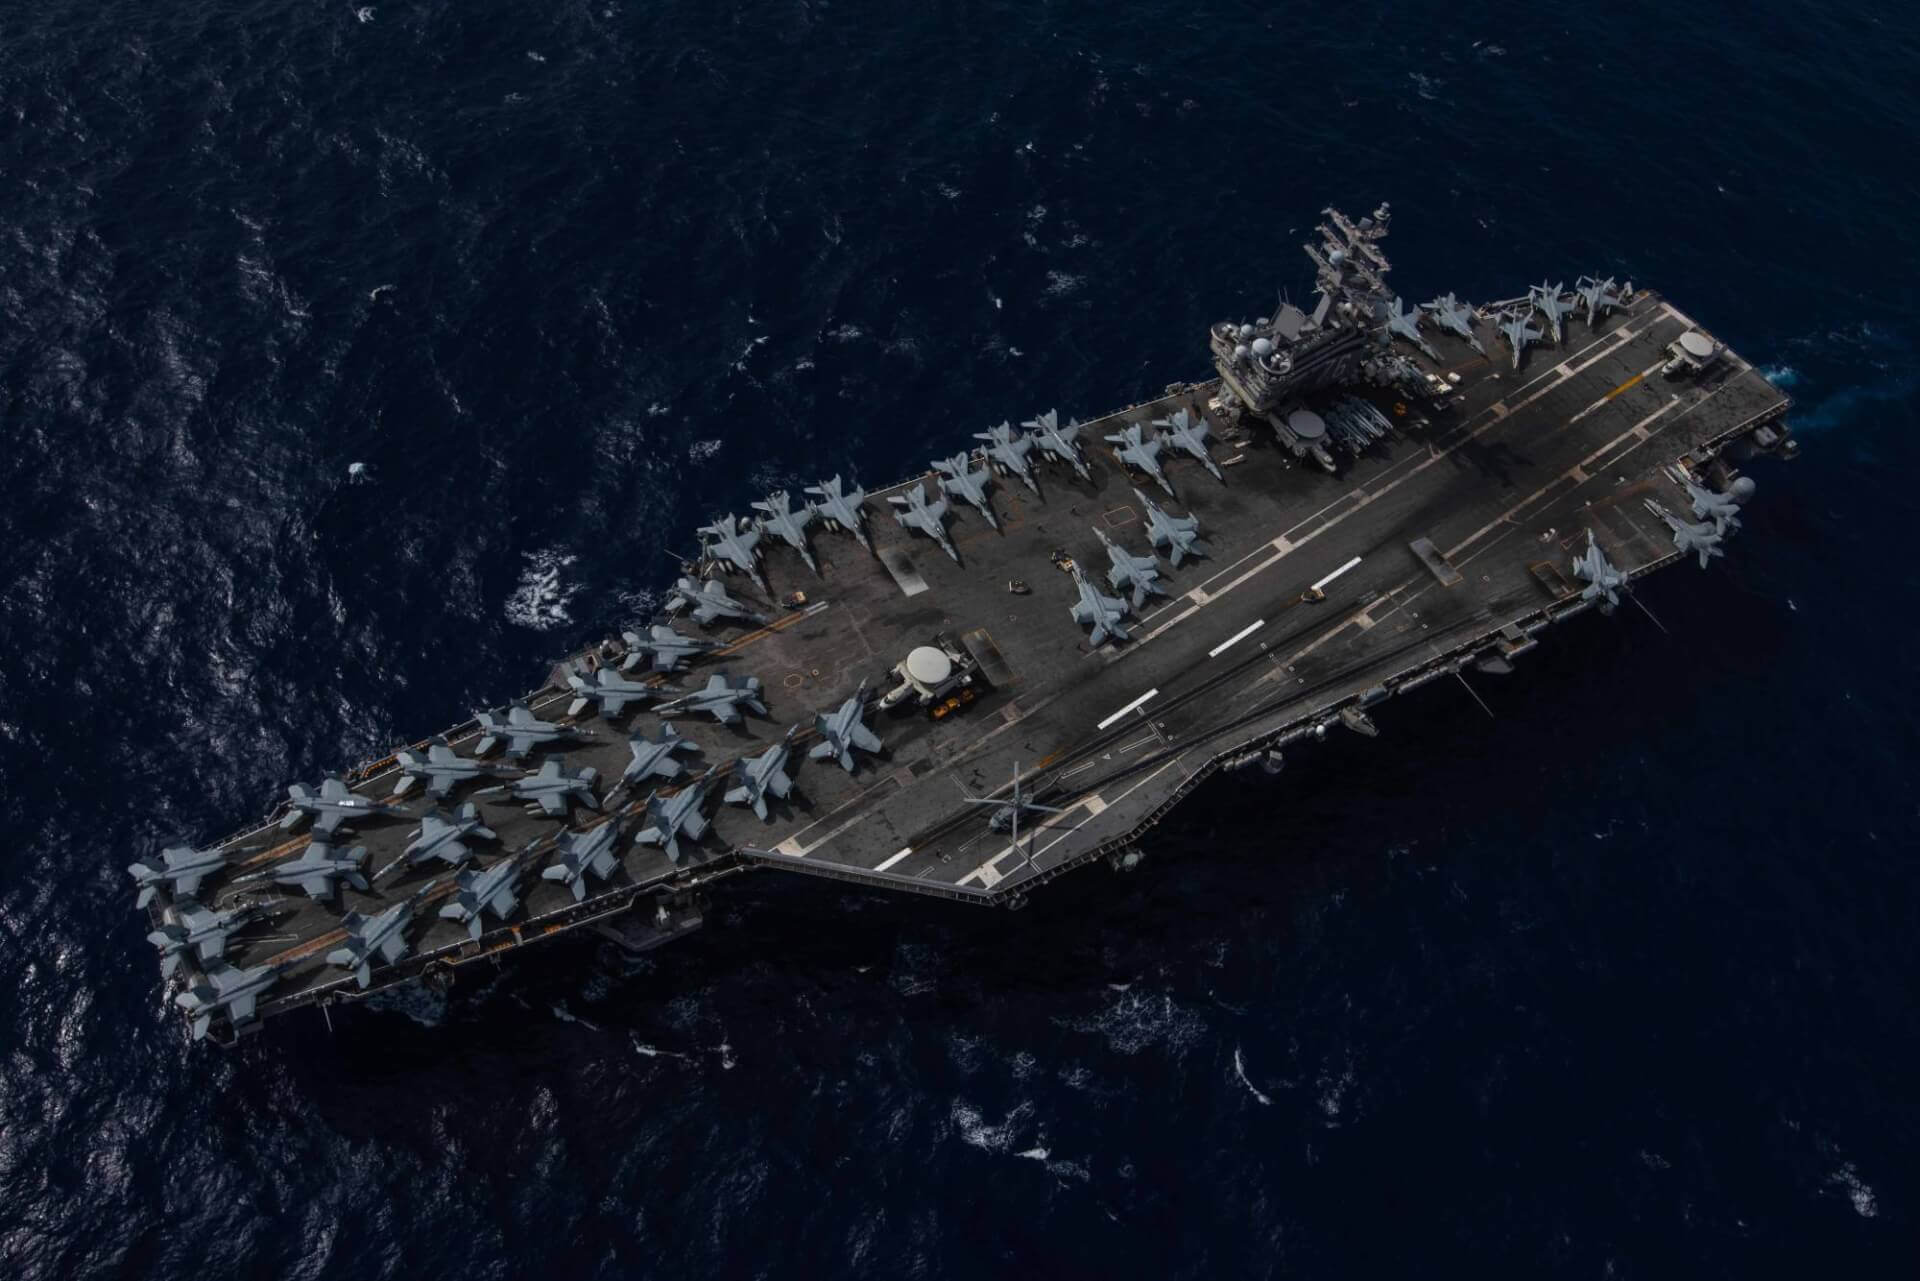 US Carrier Groups Enter South China Sea to Counter Beijing’s “Malign Influence”